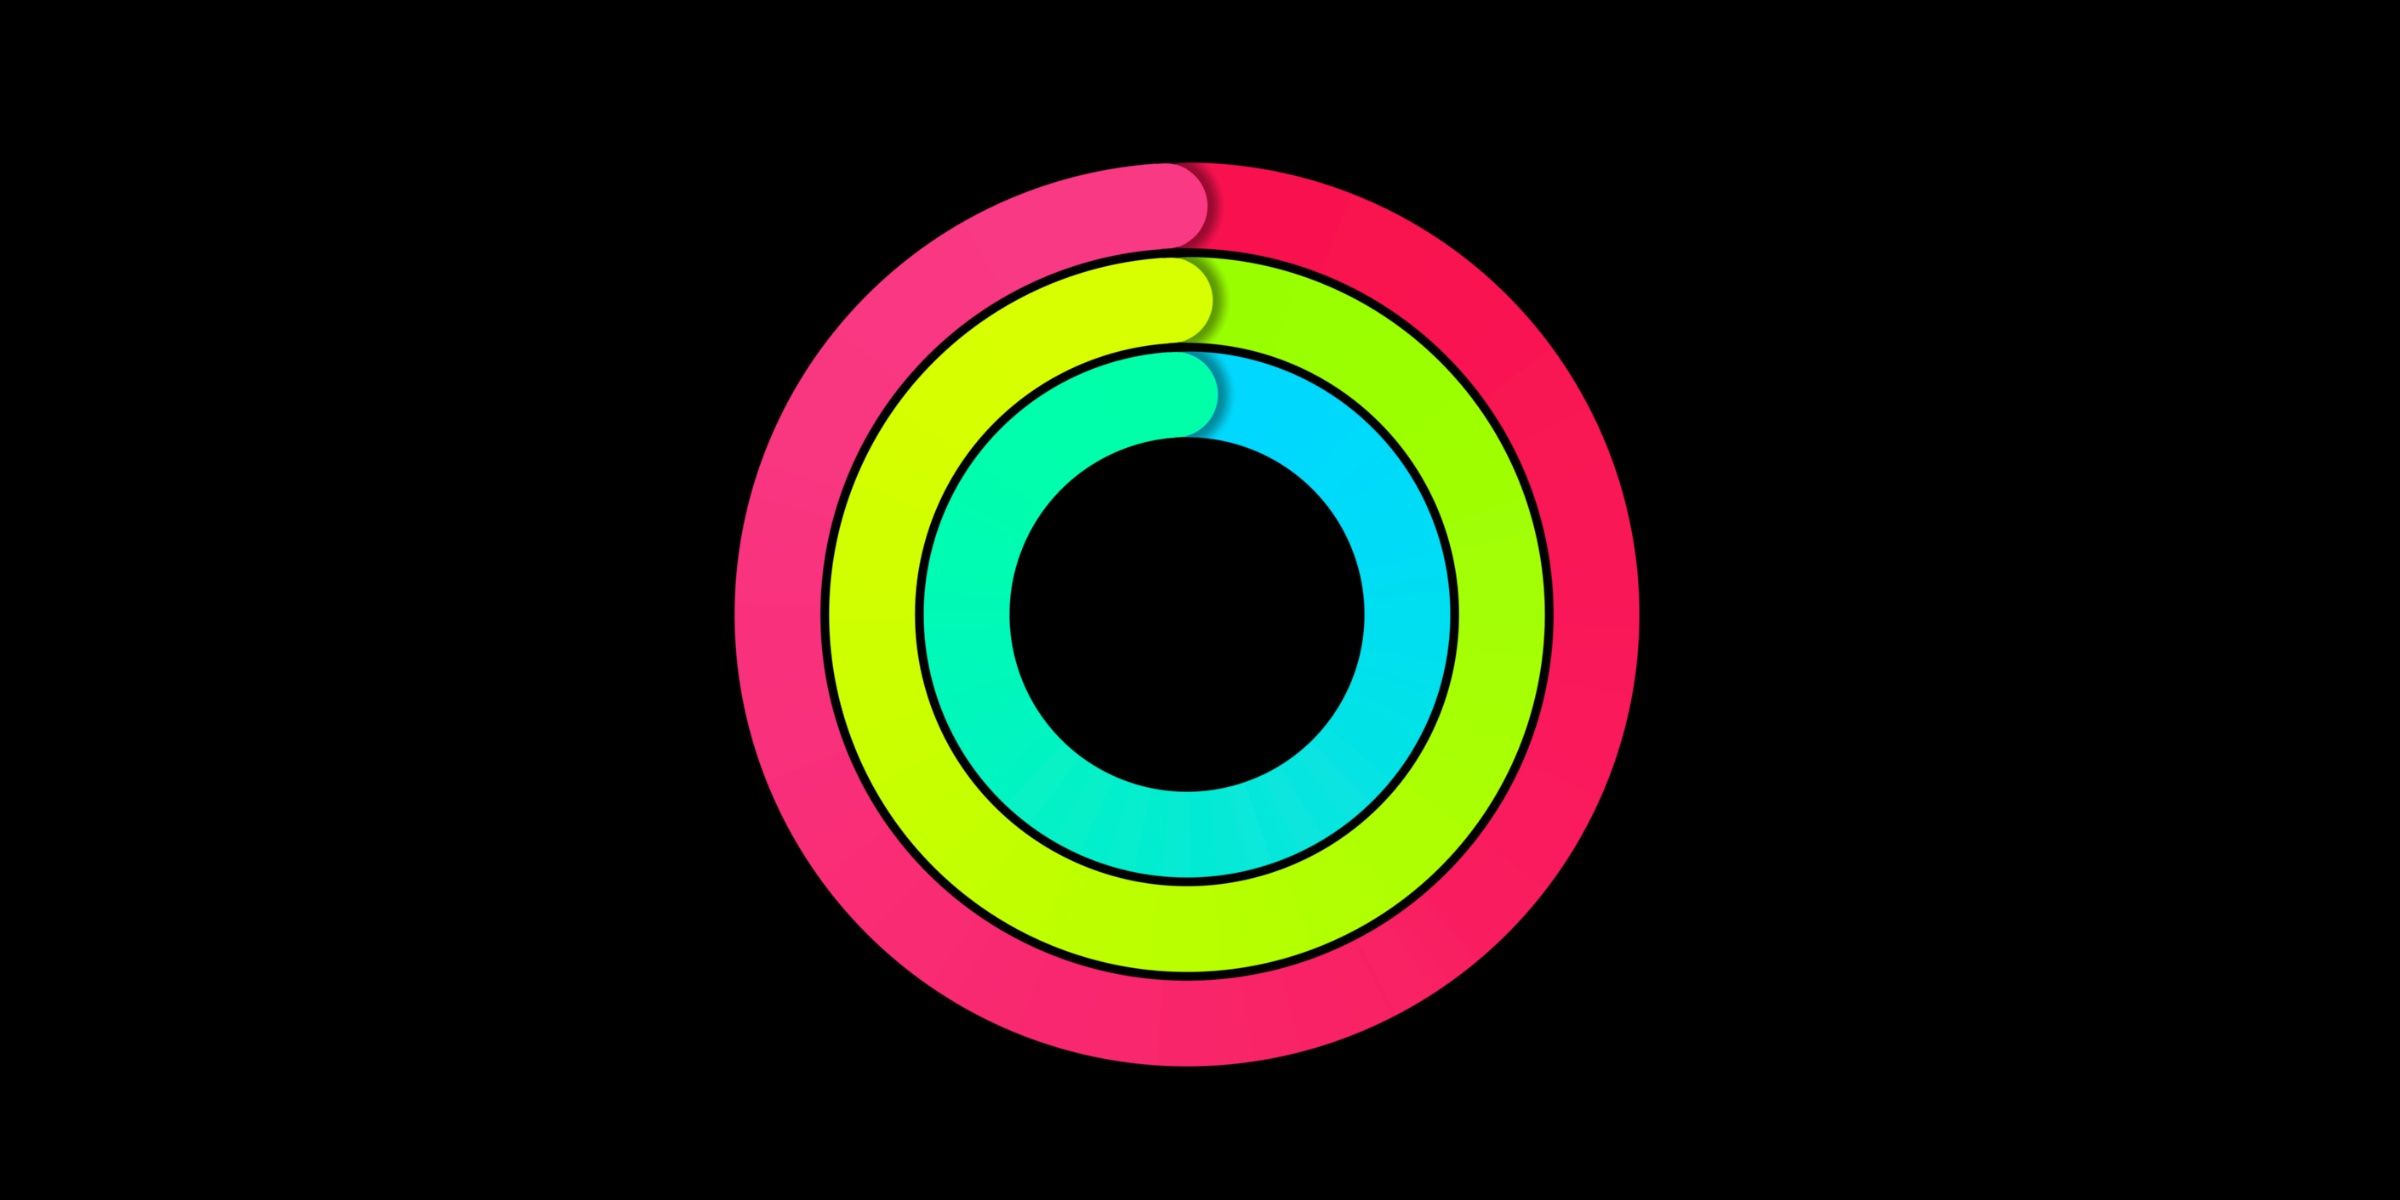 Apple's colored Activity Rings against a black background.